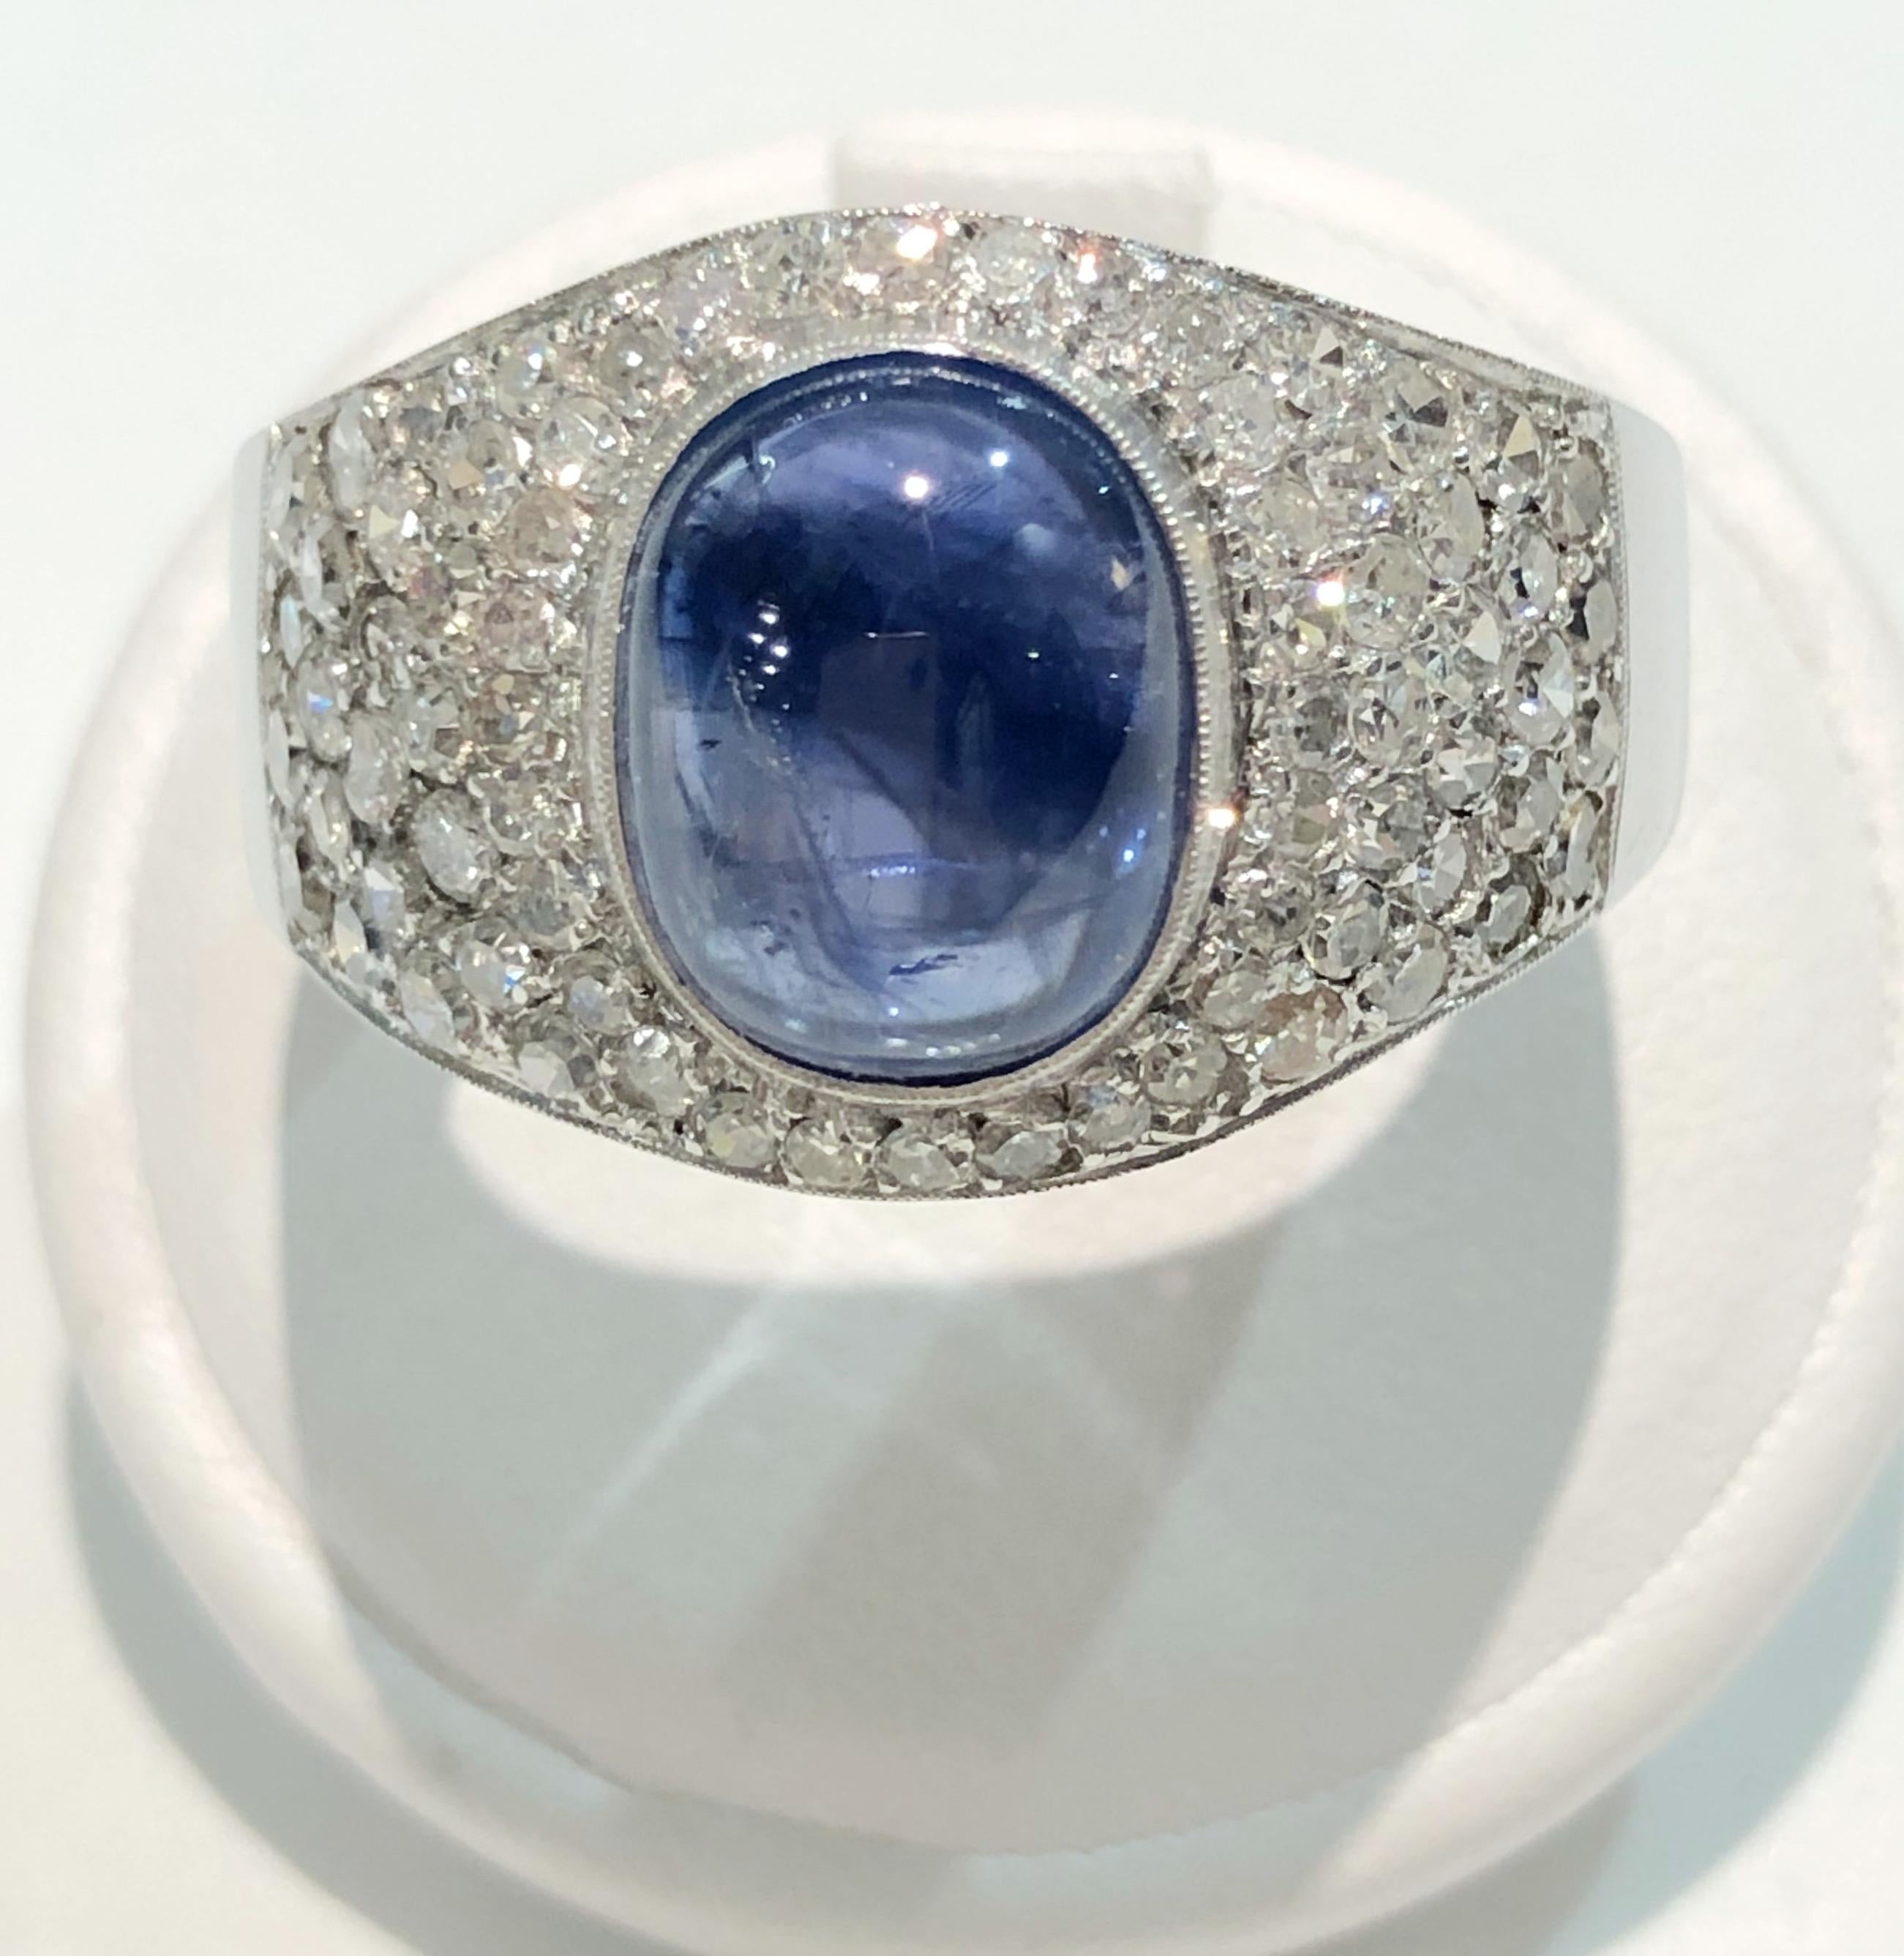 Vintage Pavé ring with 18 karat white gold band, one center cabochon sapphire of 3 karats, and brilliant diamonds for a total of 0.5 karats, Italy 1930s-1940s
Ring size US 9